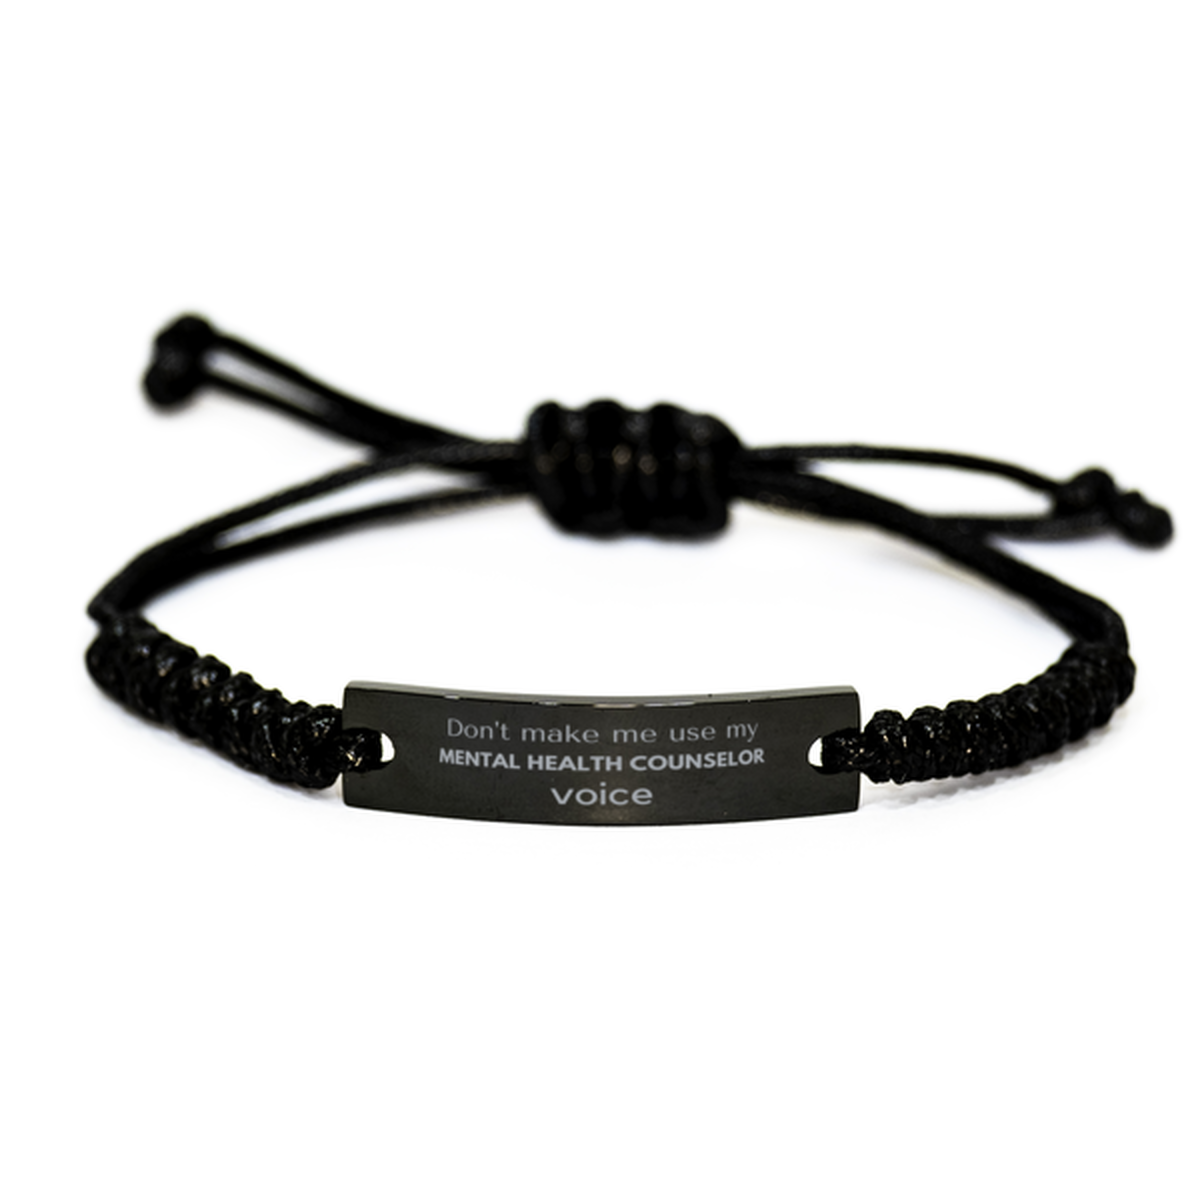 Don't make me use my Mental Health Counselor voice, Sarcasm Mental Health Counselor Gifts, Christmas Mental Health Counselor Black Rope Bracelet Birthday Unique Gifts For Mental Health Counselor Coworkers, Men, Women, Colleague, Friends